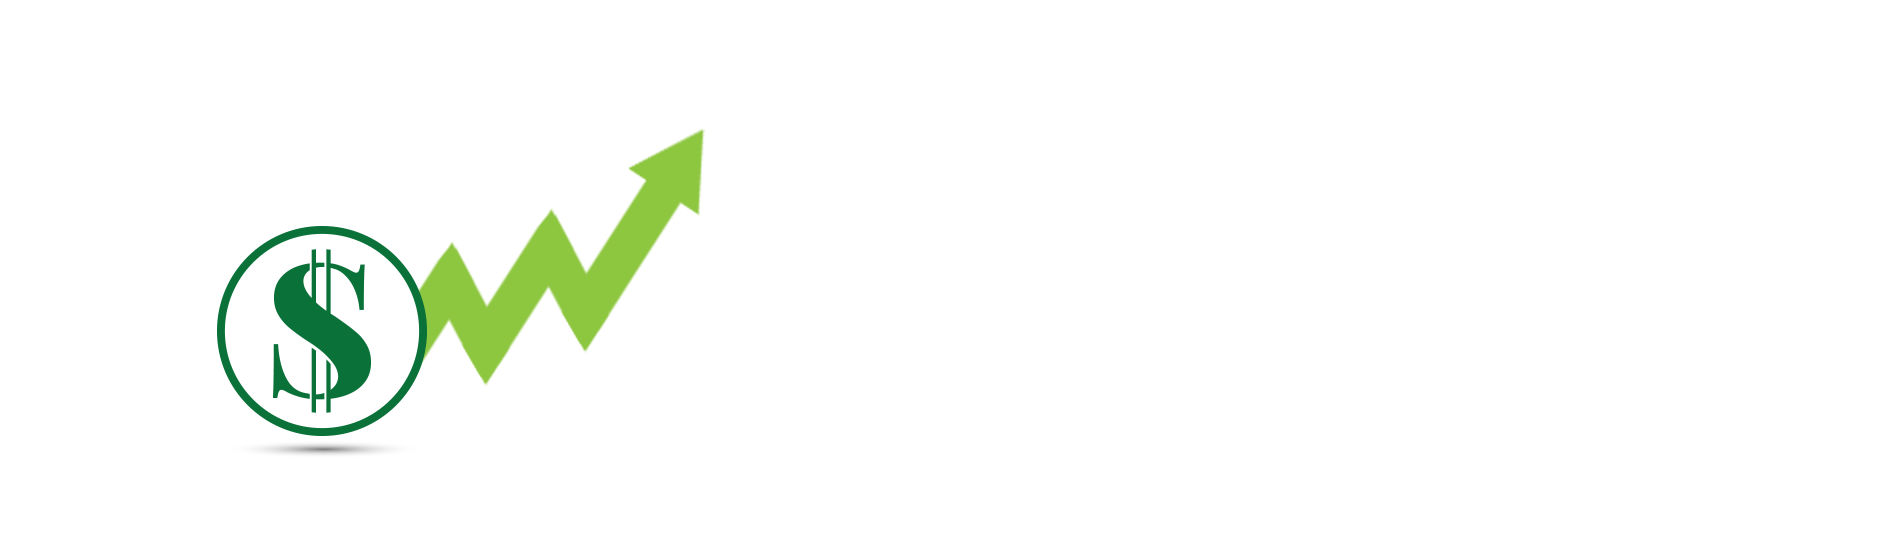 Punch'd Energy - The Best NEW Form Factor in Personal Energy